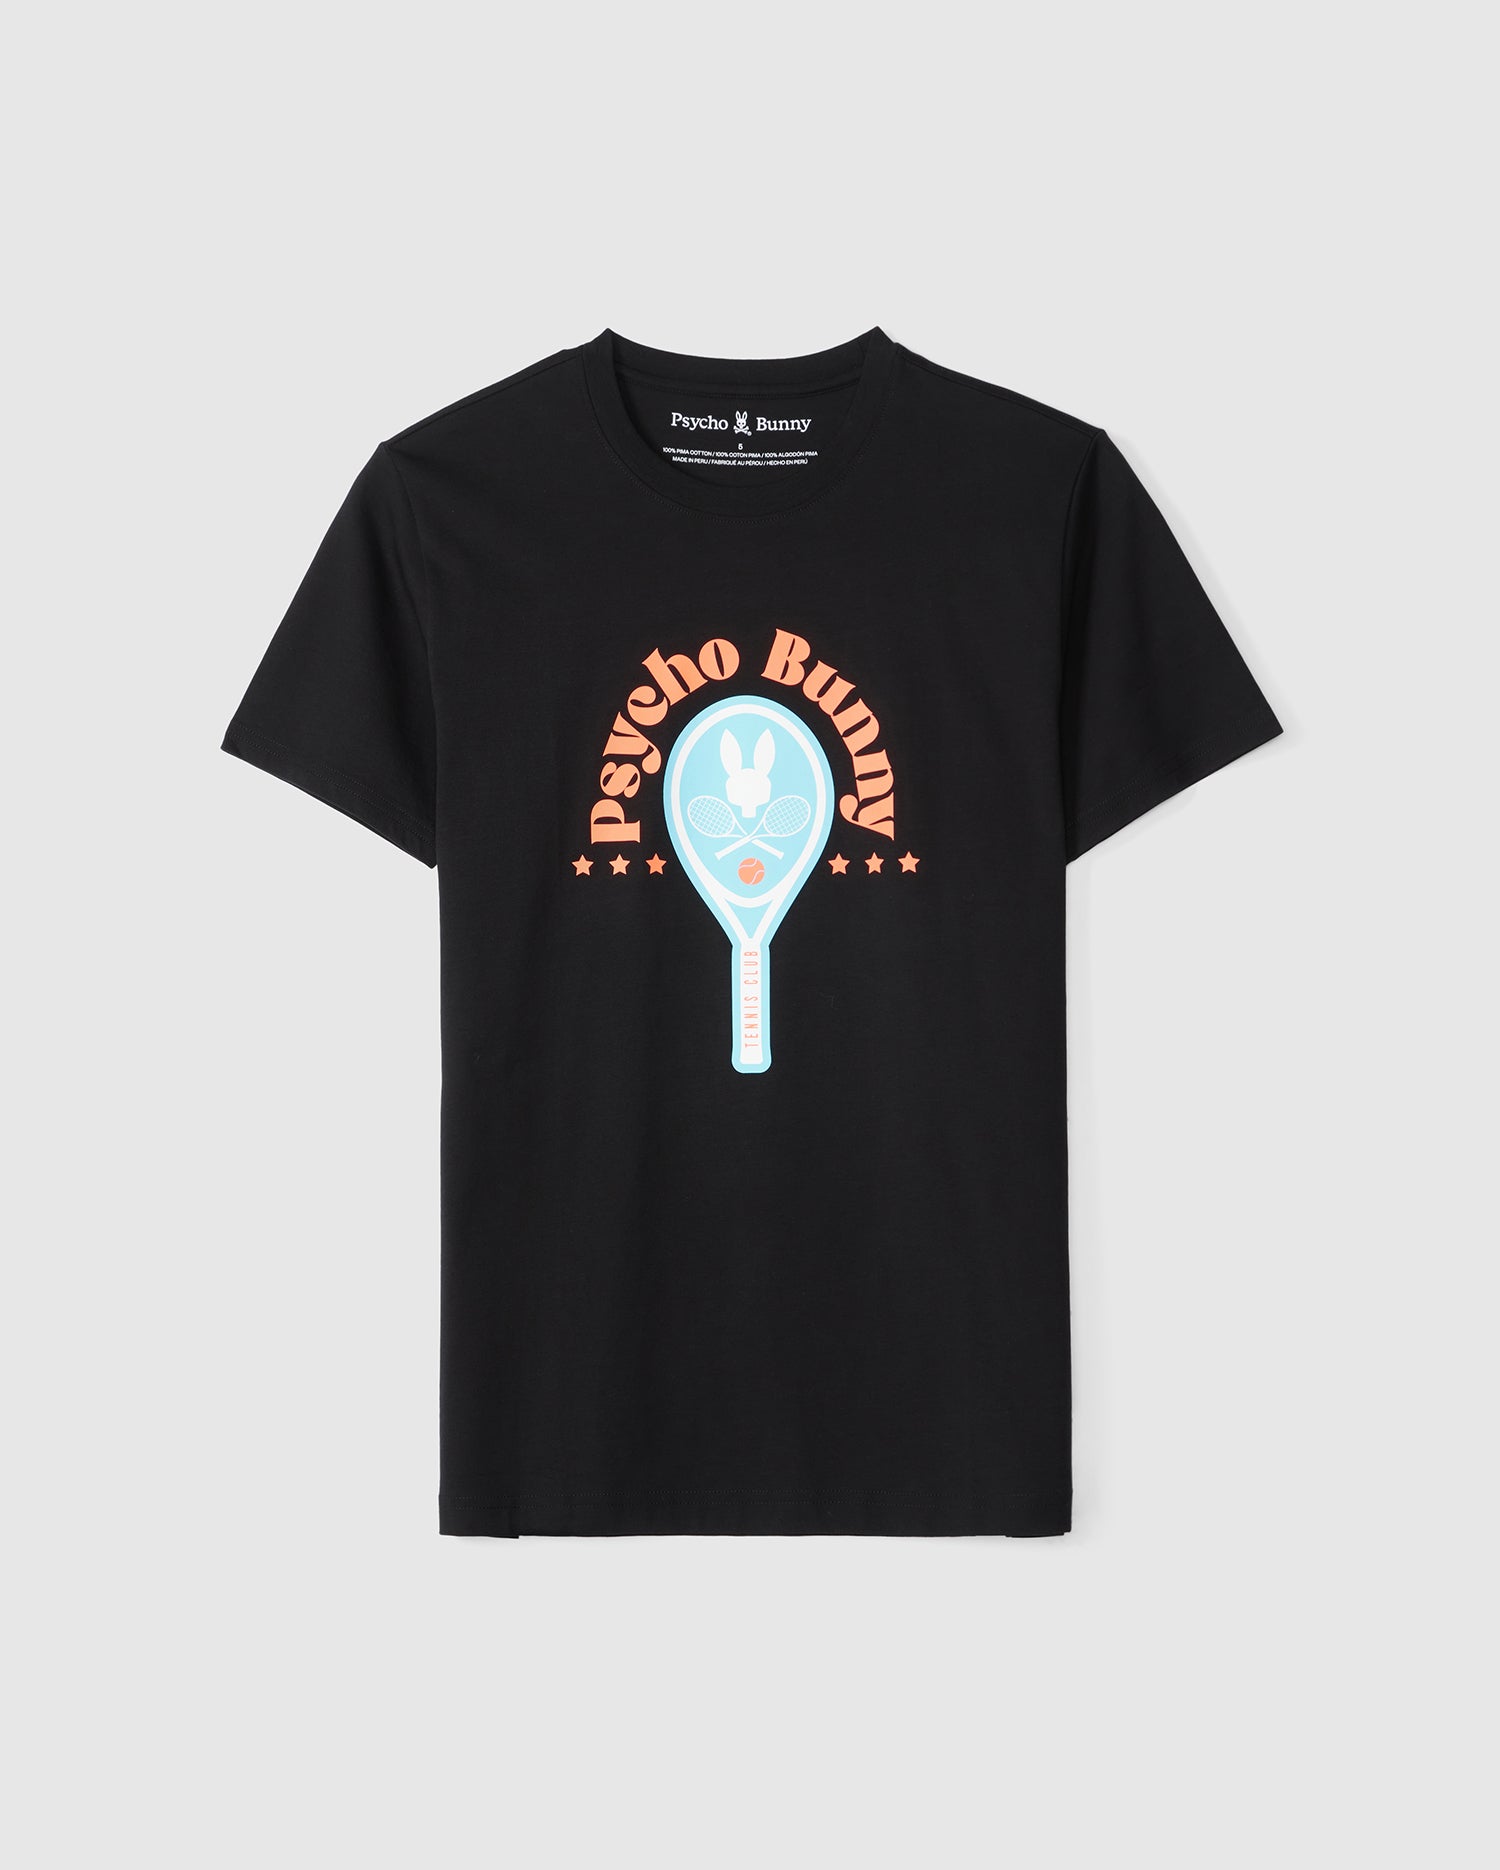 A black Pima cotton jersey T-shirt featuring a light blue tennis racket with a white bunny face inside. The tennis-inspired Bunny logo is surrounded by the words 